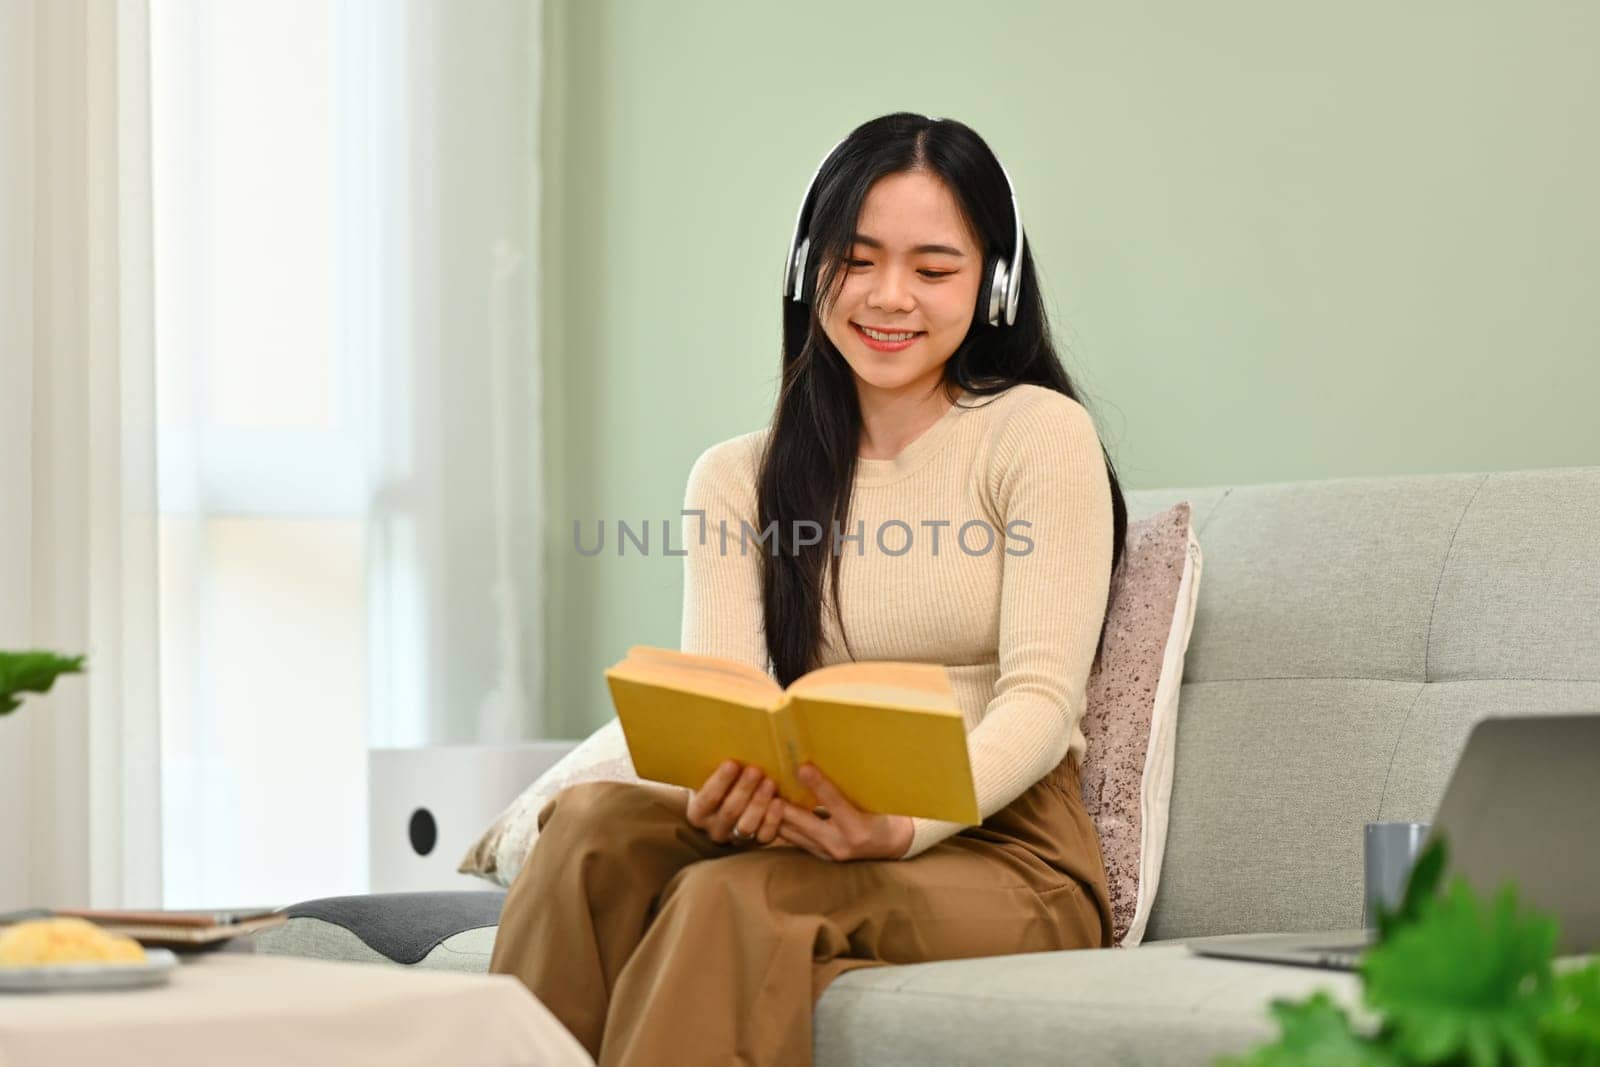 Portrait of smiling young asian woman in headphone reading book on couch. Education, leisure and lifestyle concept.